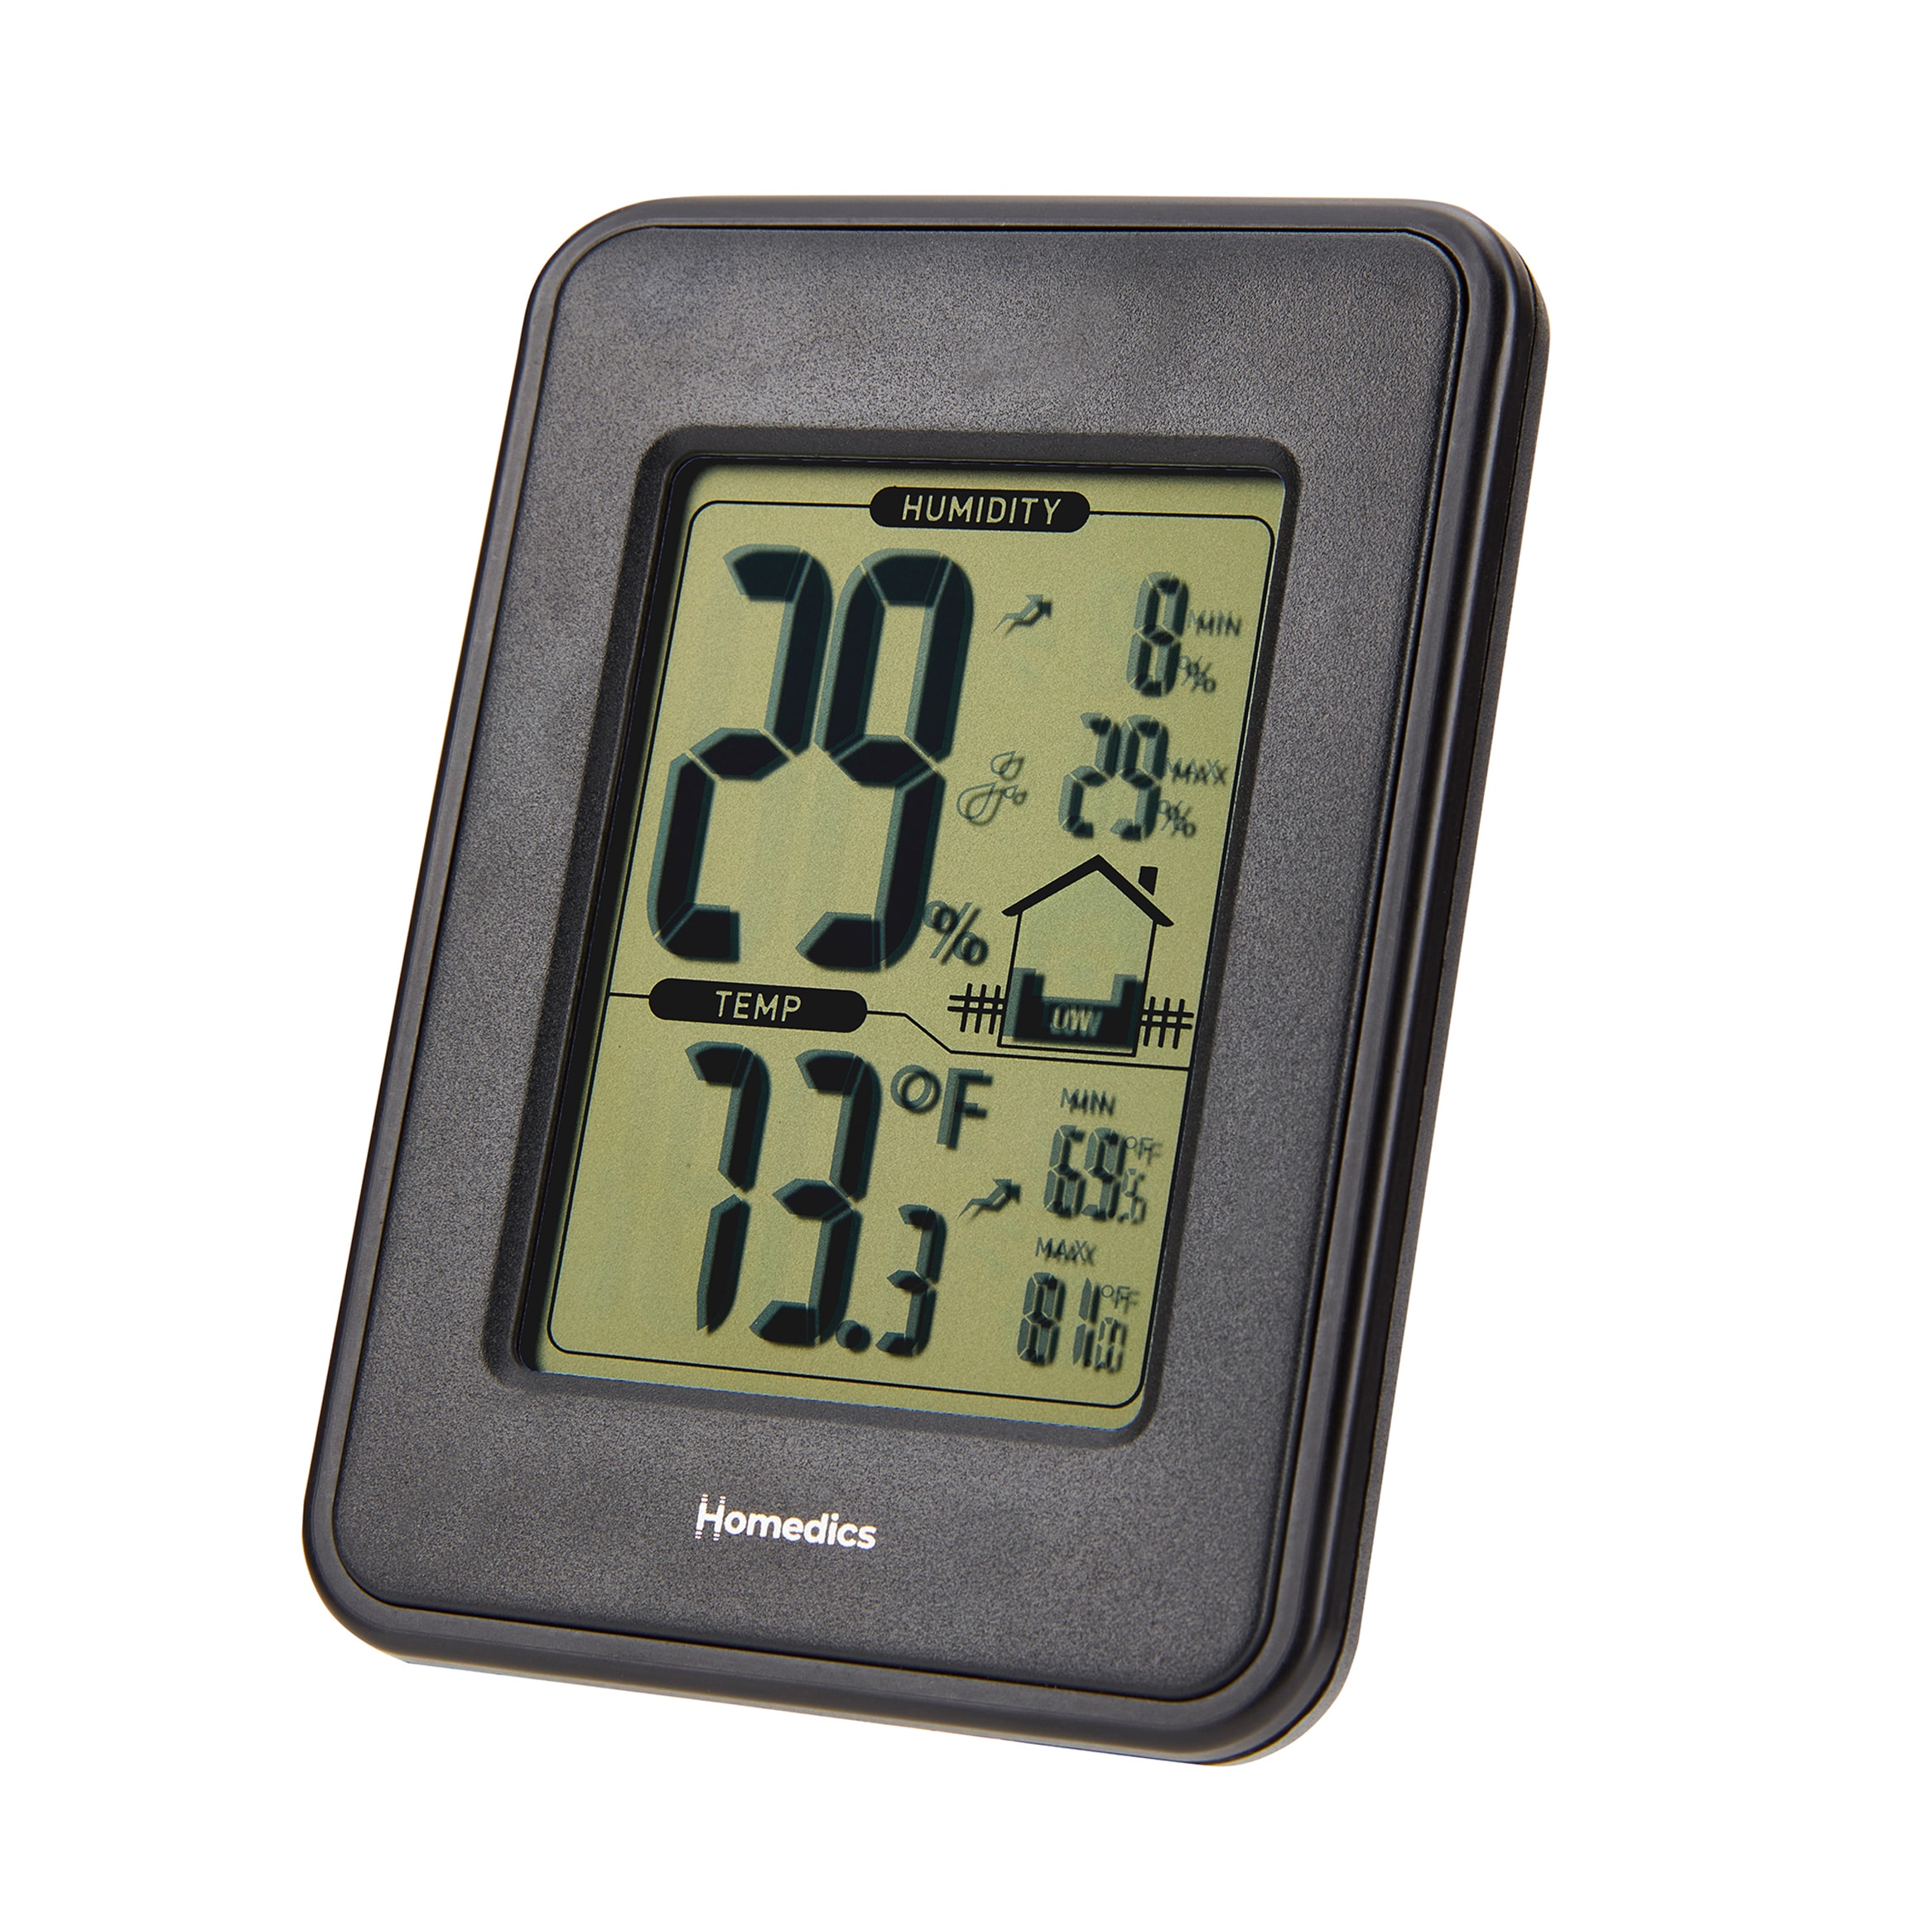 Buy HuBDIC (Highest/Lowest Temperature and Humidity Recording